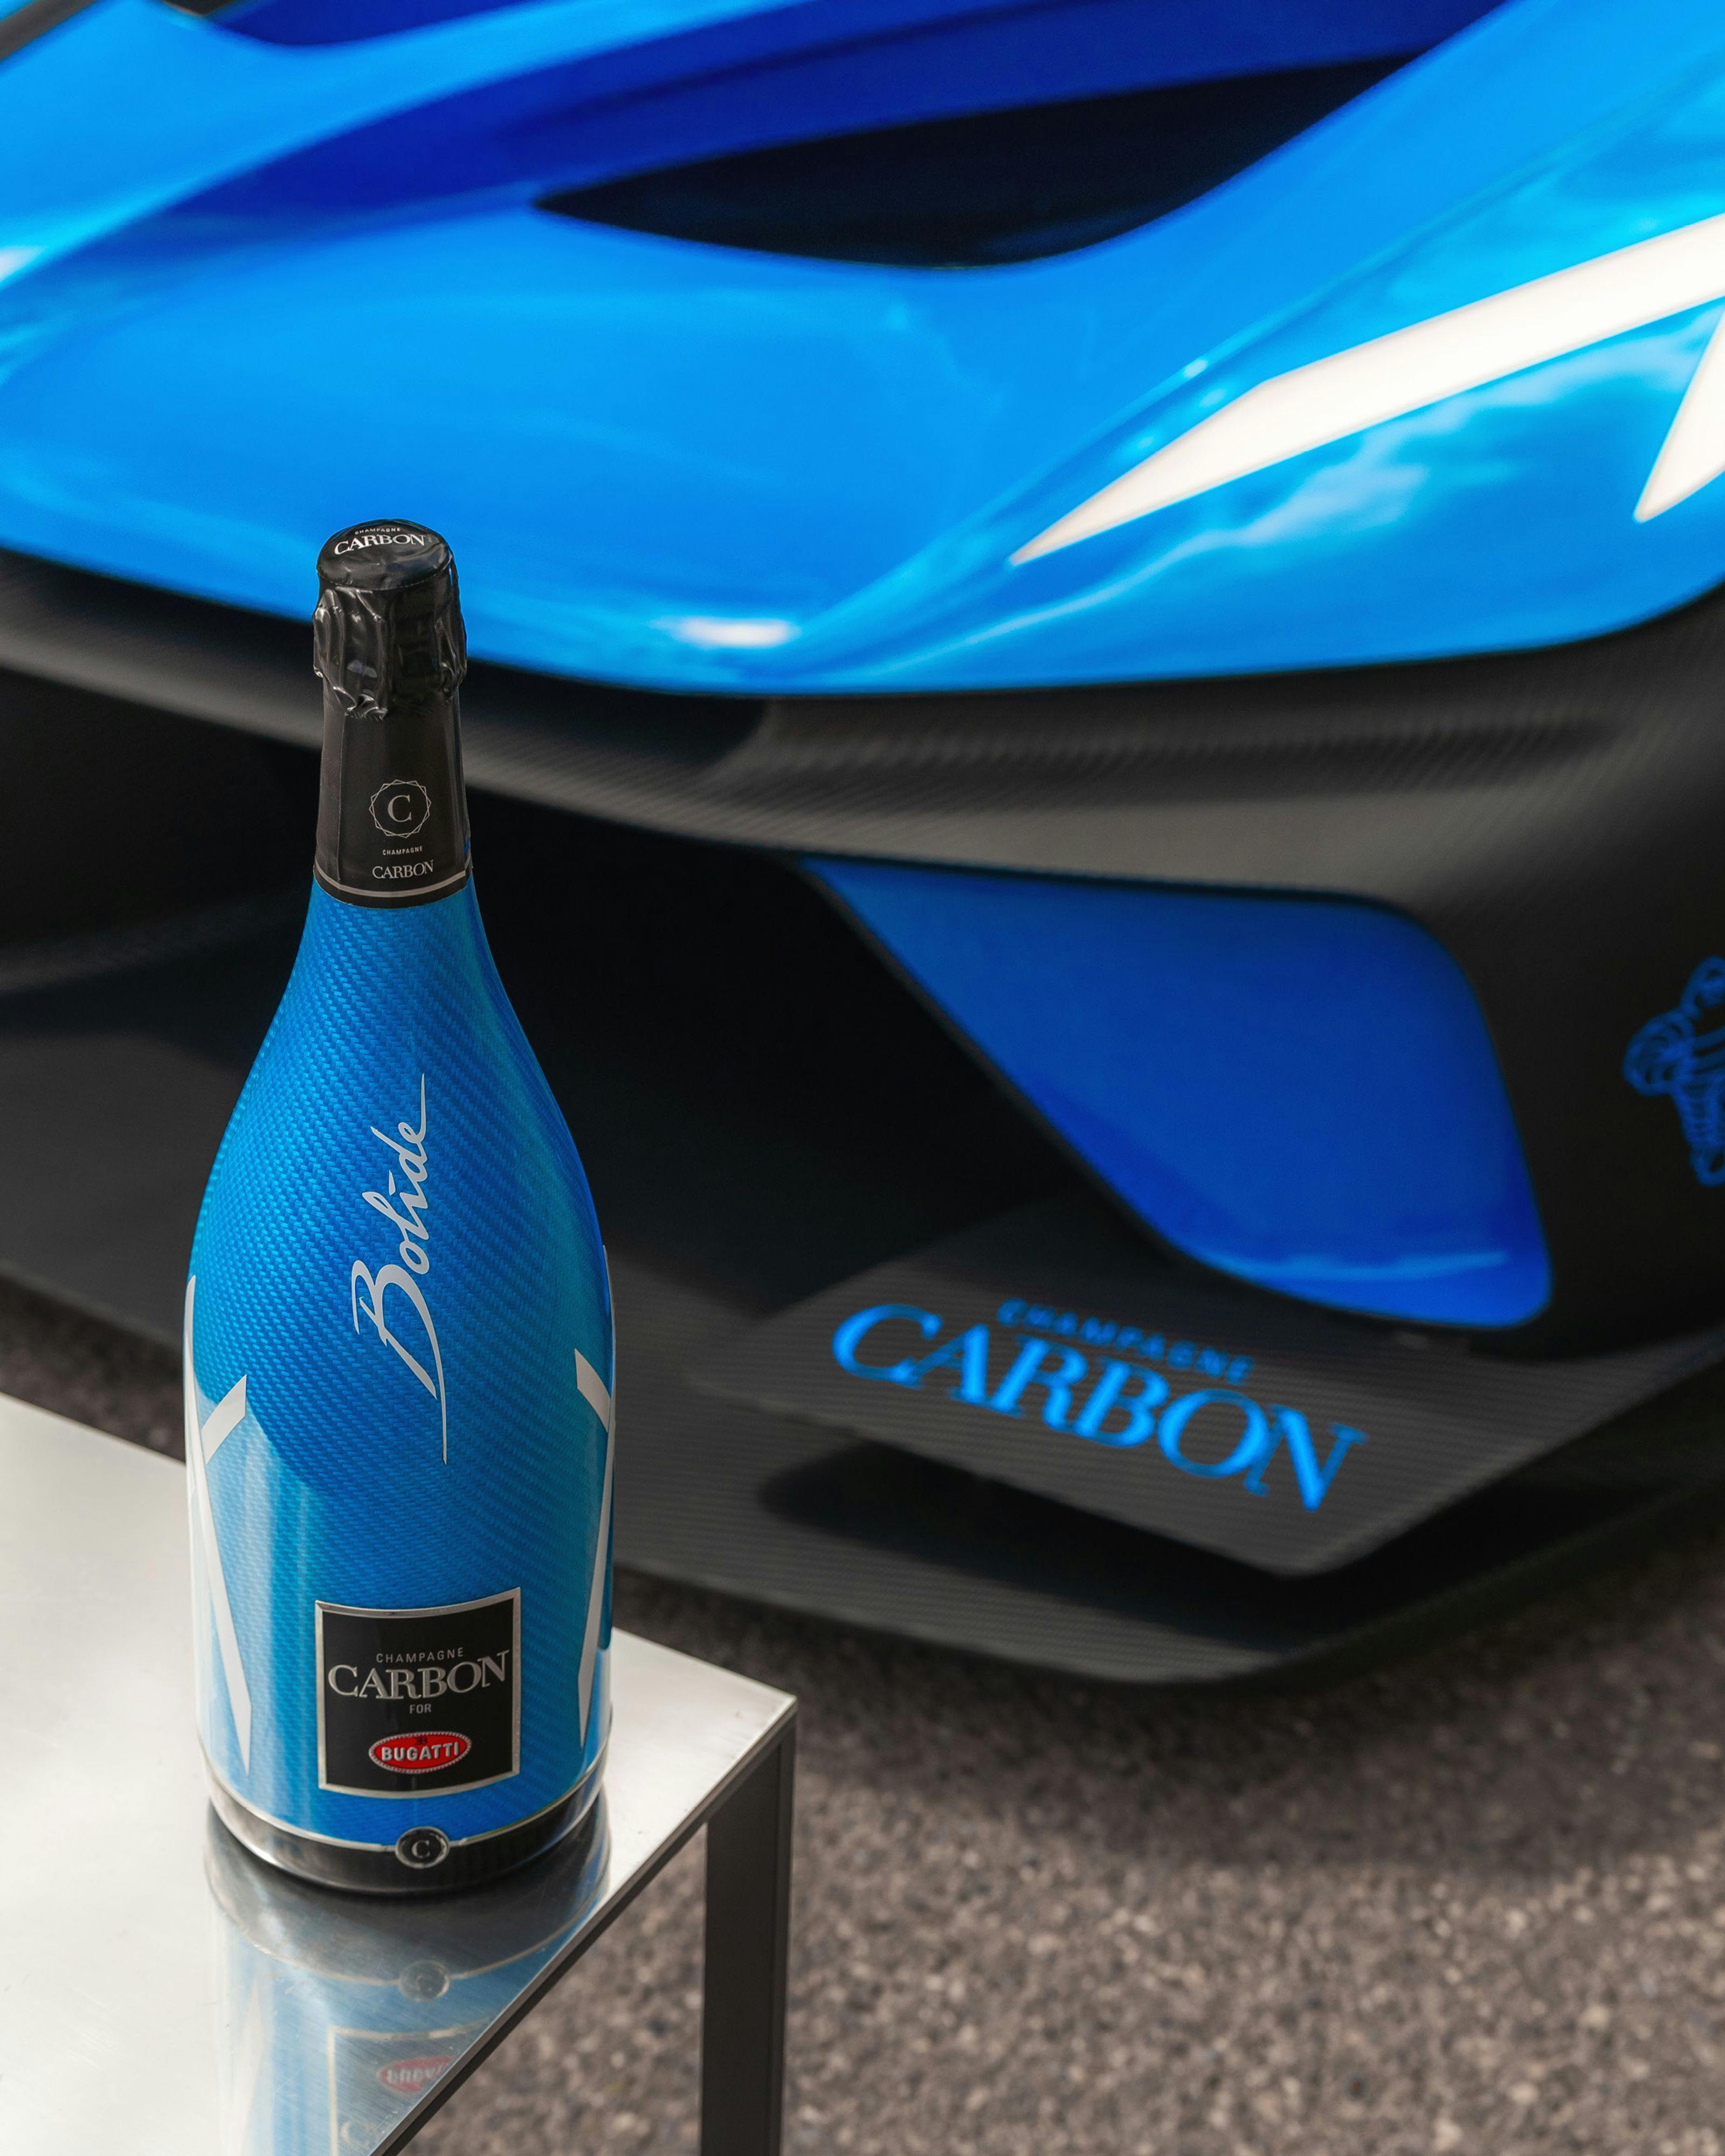 Bugatti Reveals ƎB.03 Edition with Champagne Carbon, Inspired by Bolide